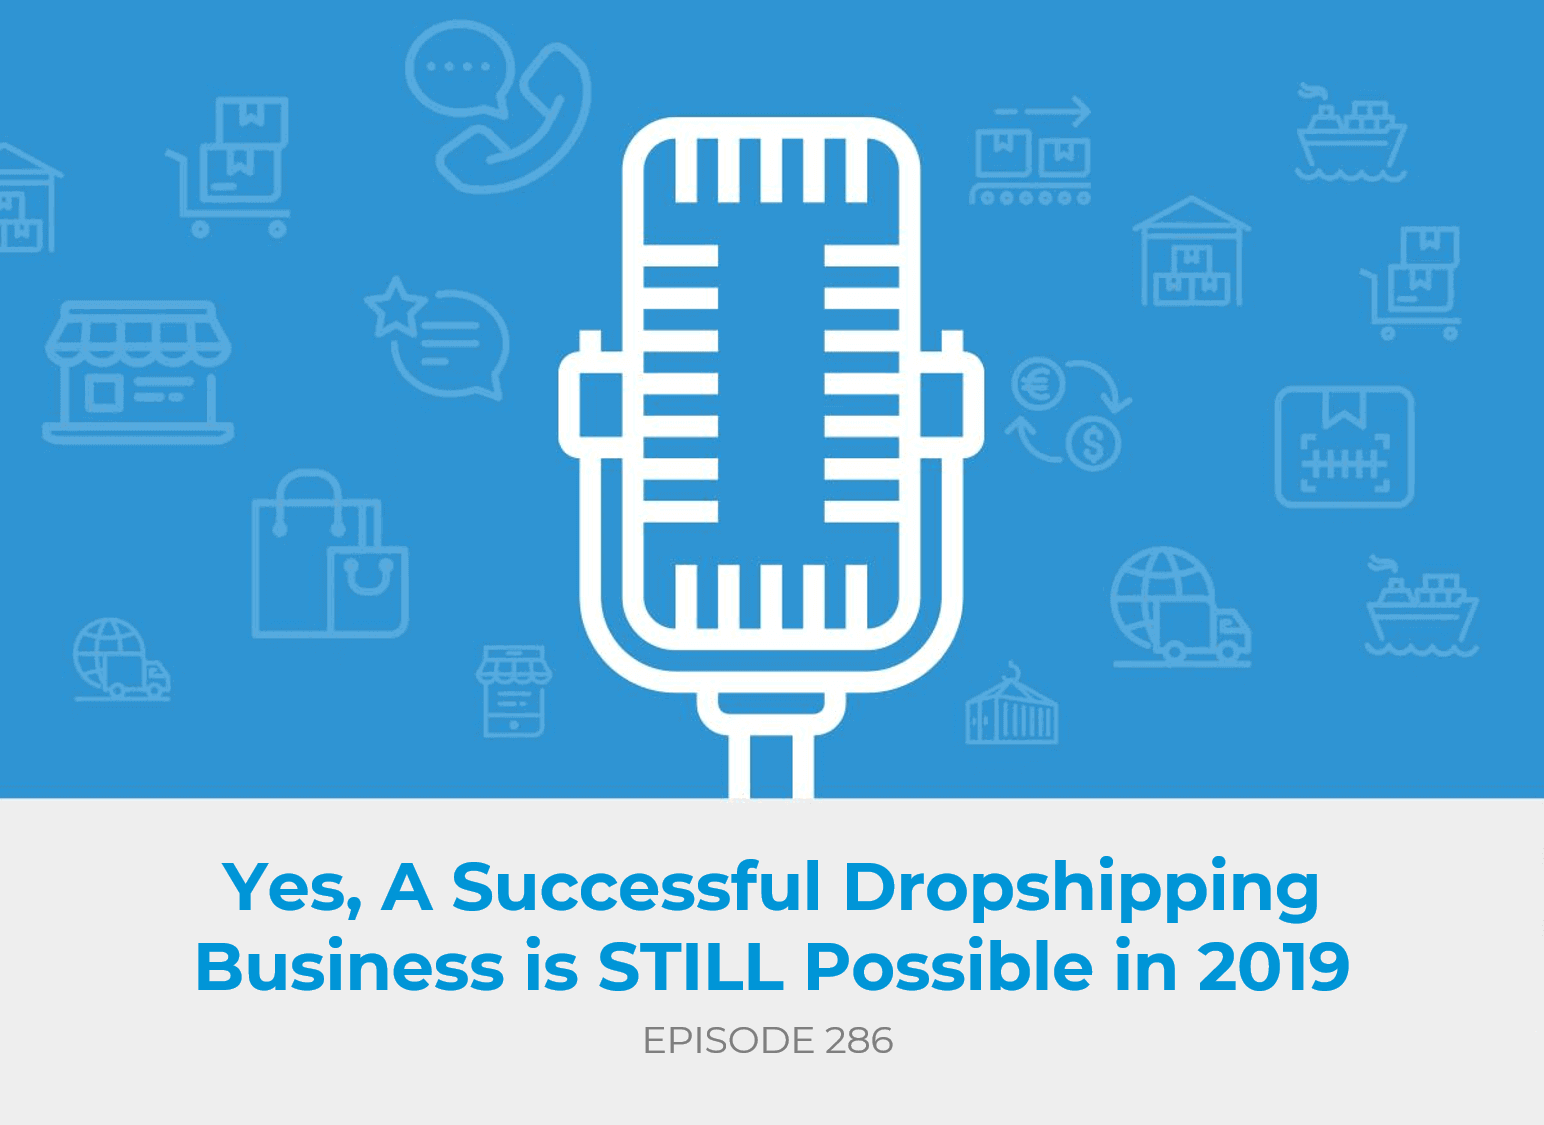 Yes, A Successful Dropshipping Business is STILL Possible in 2019